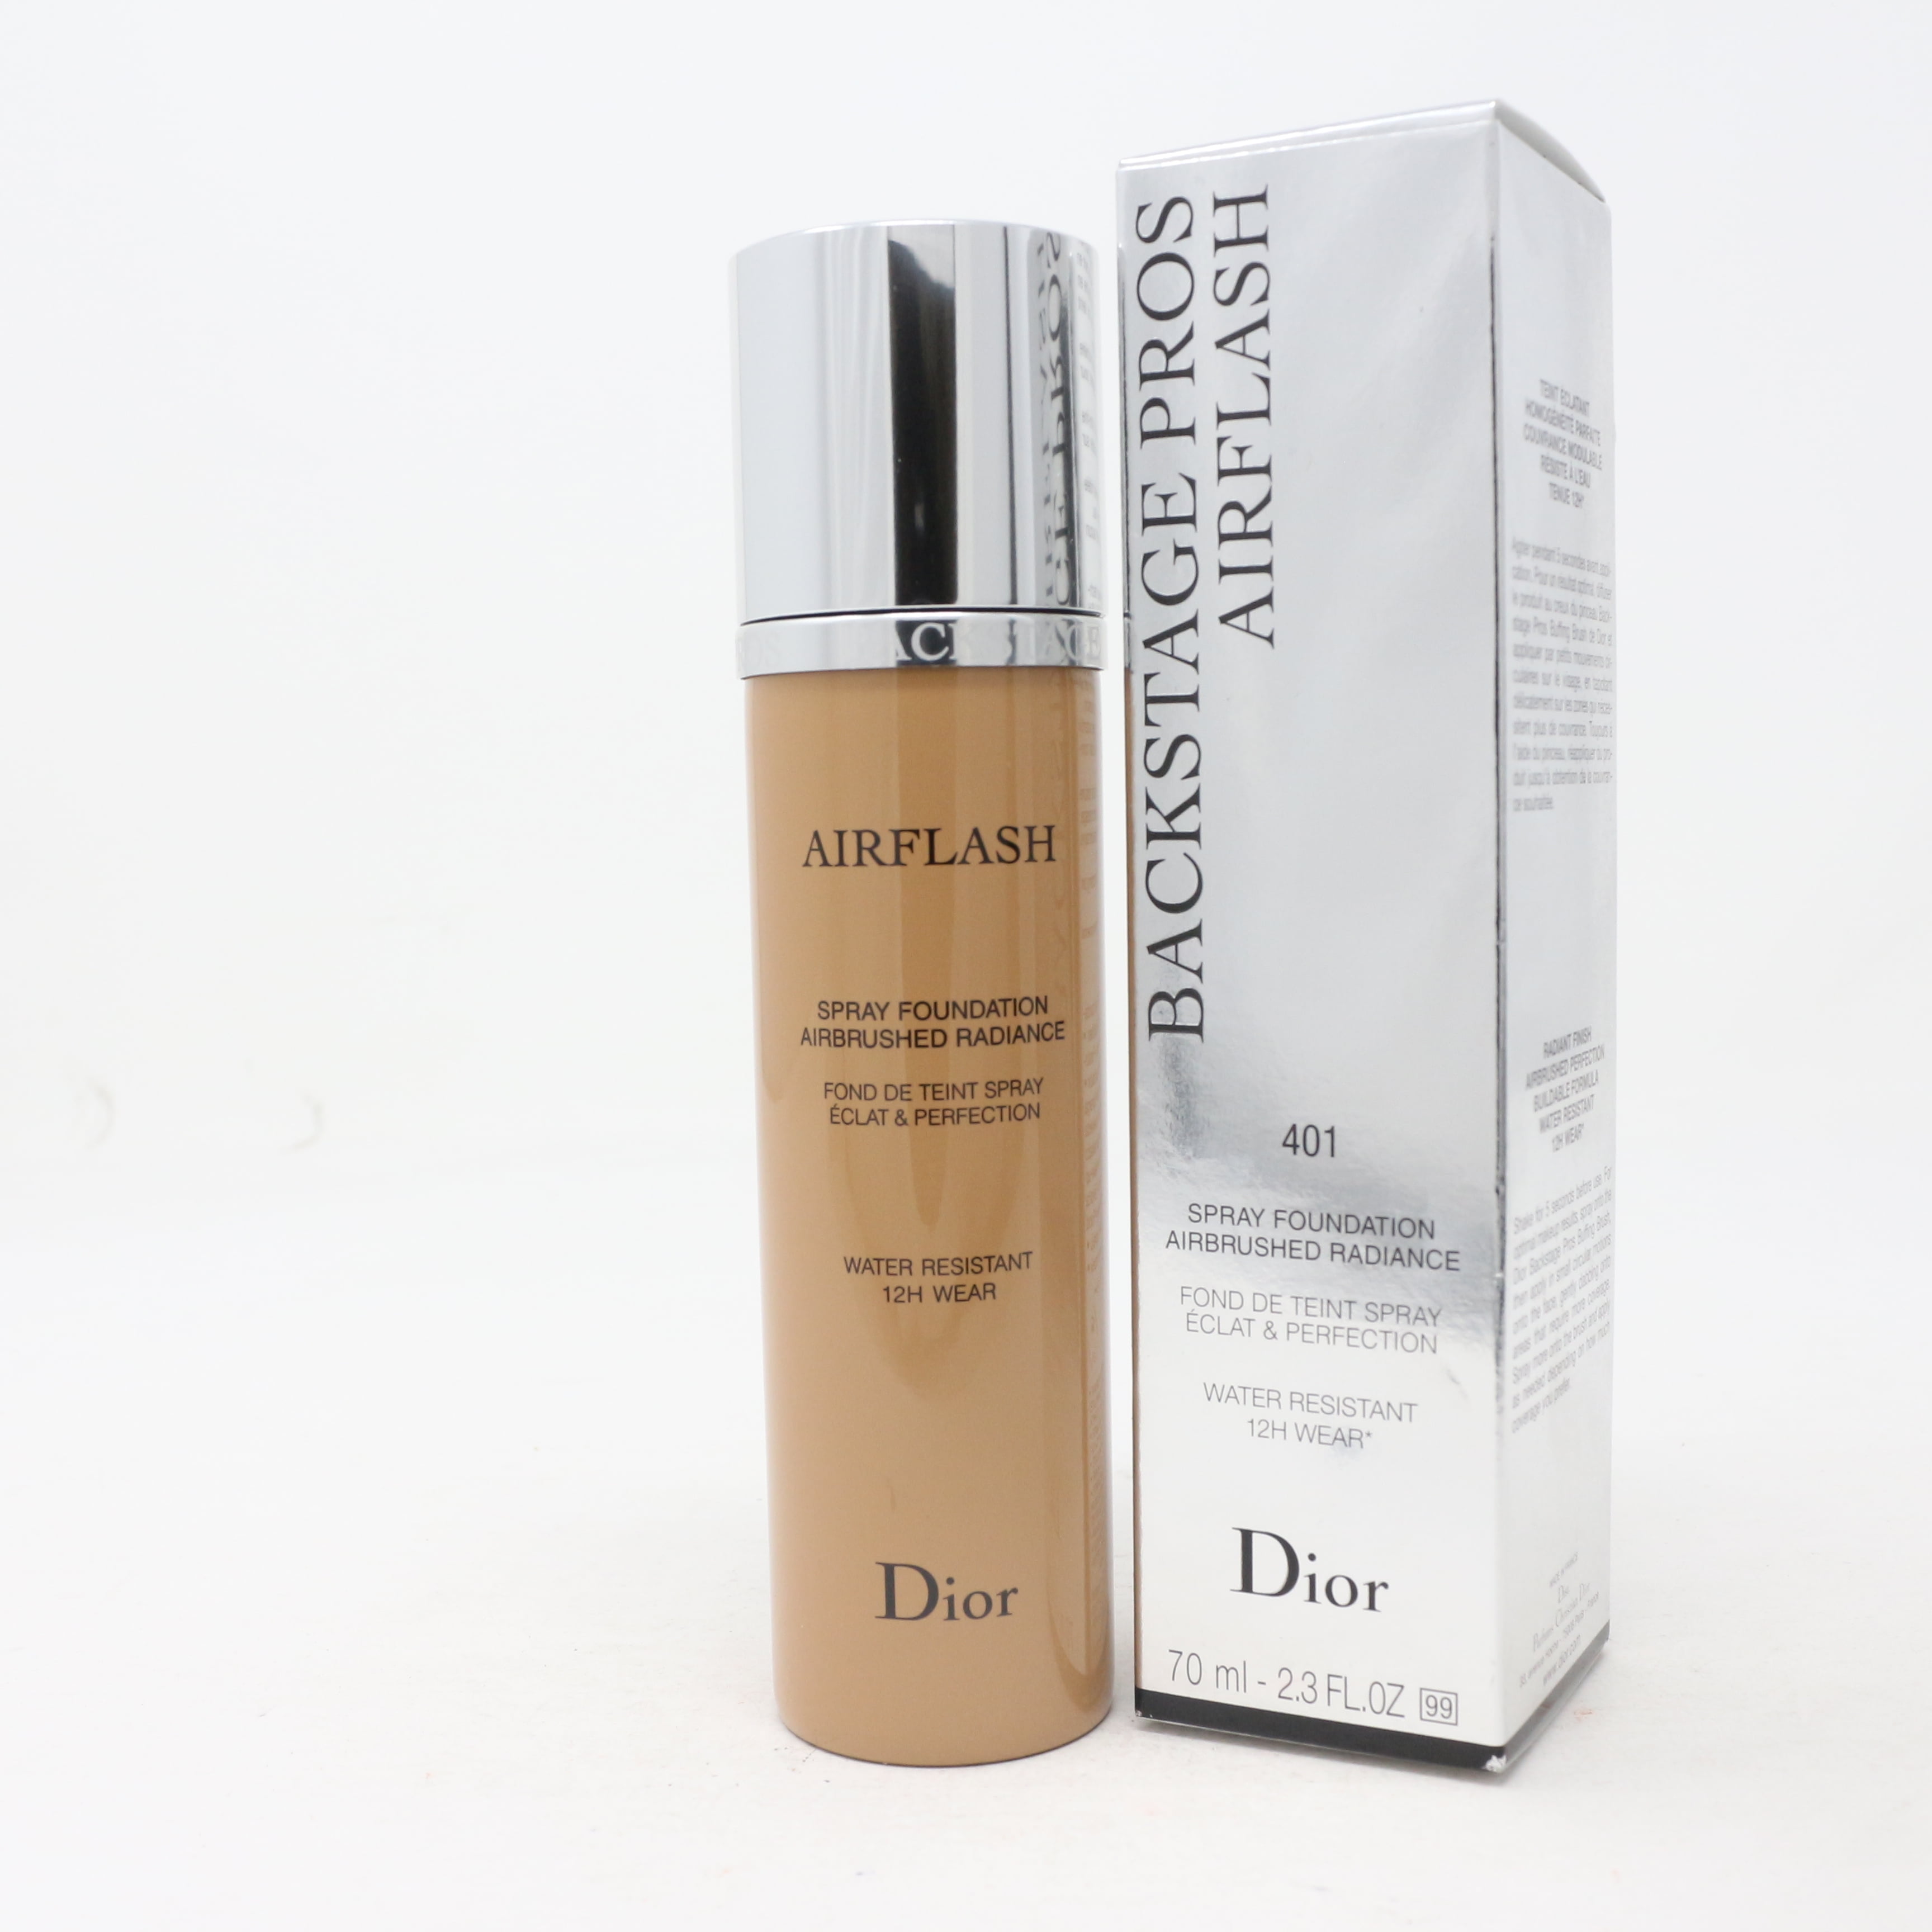 do they even compare dior airflash spray foundation vs sephora perfection mist  airbrush foundation  YouTube